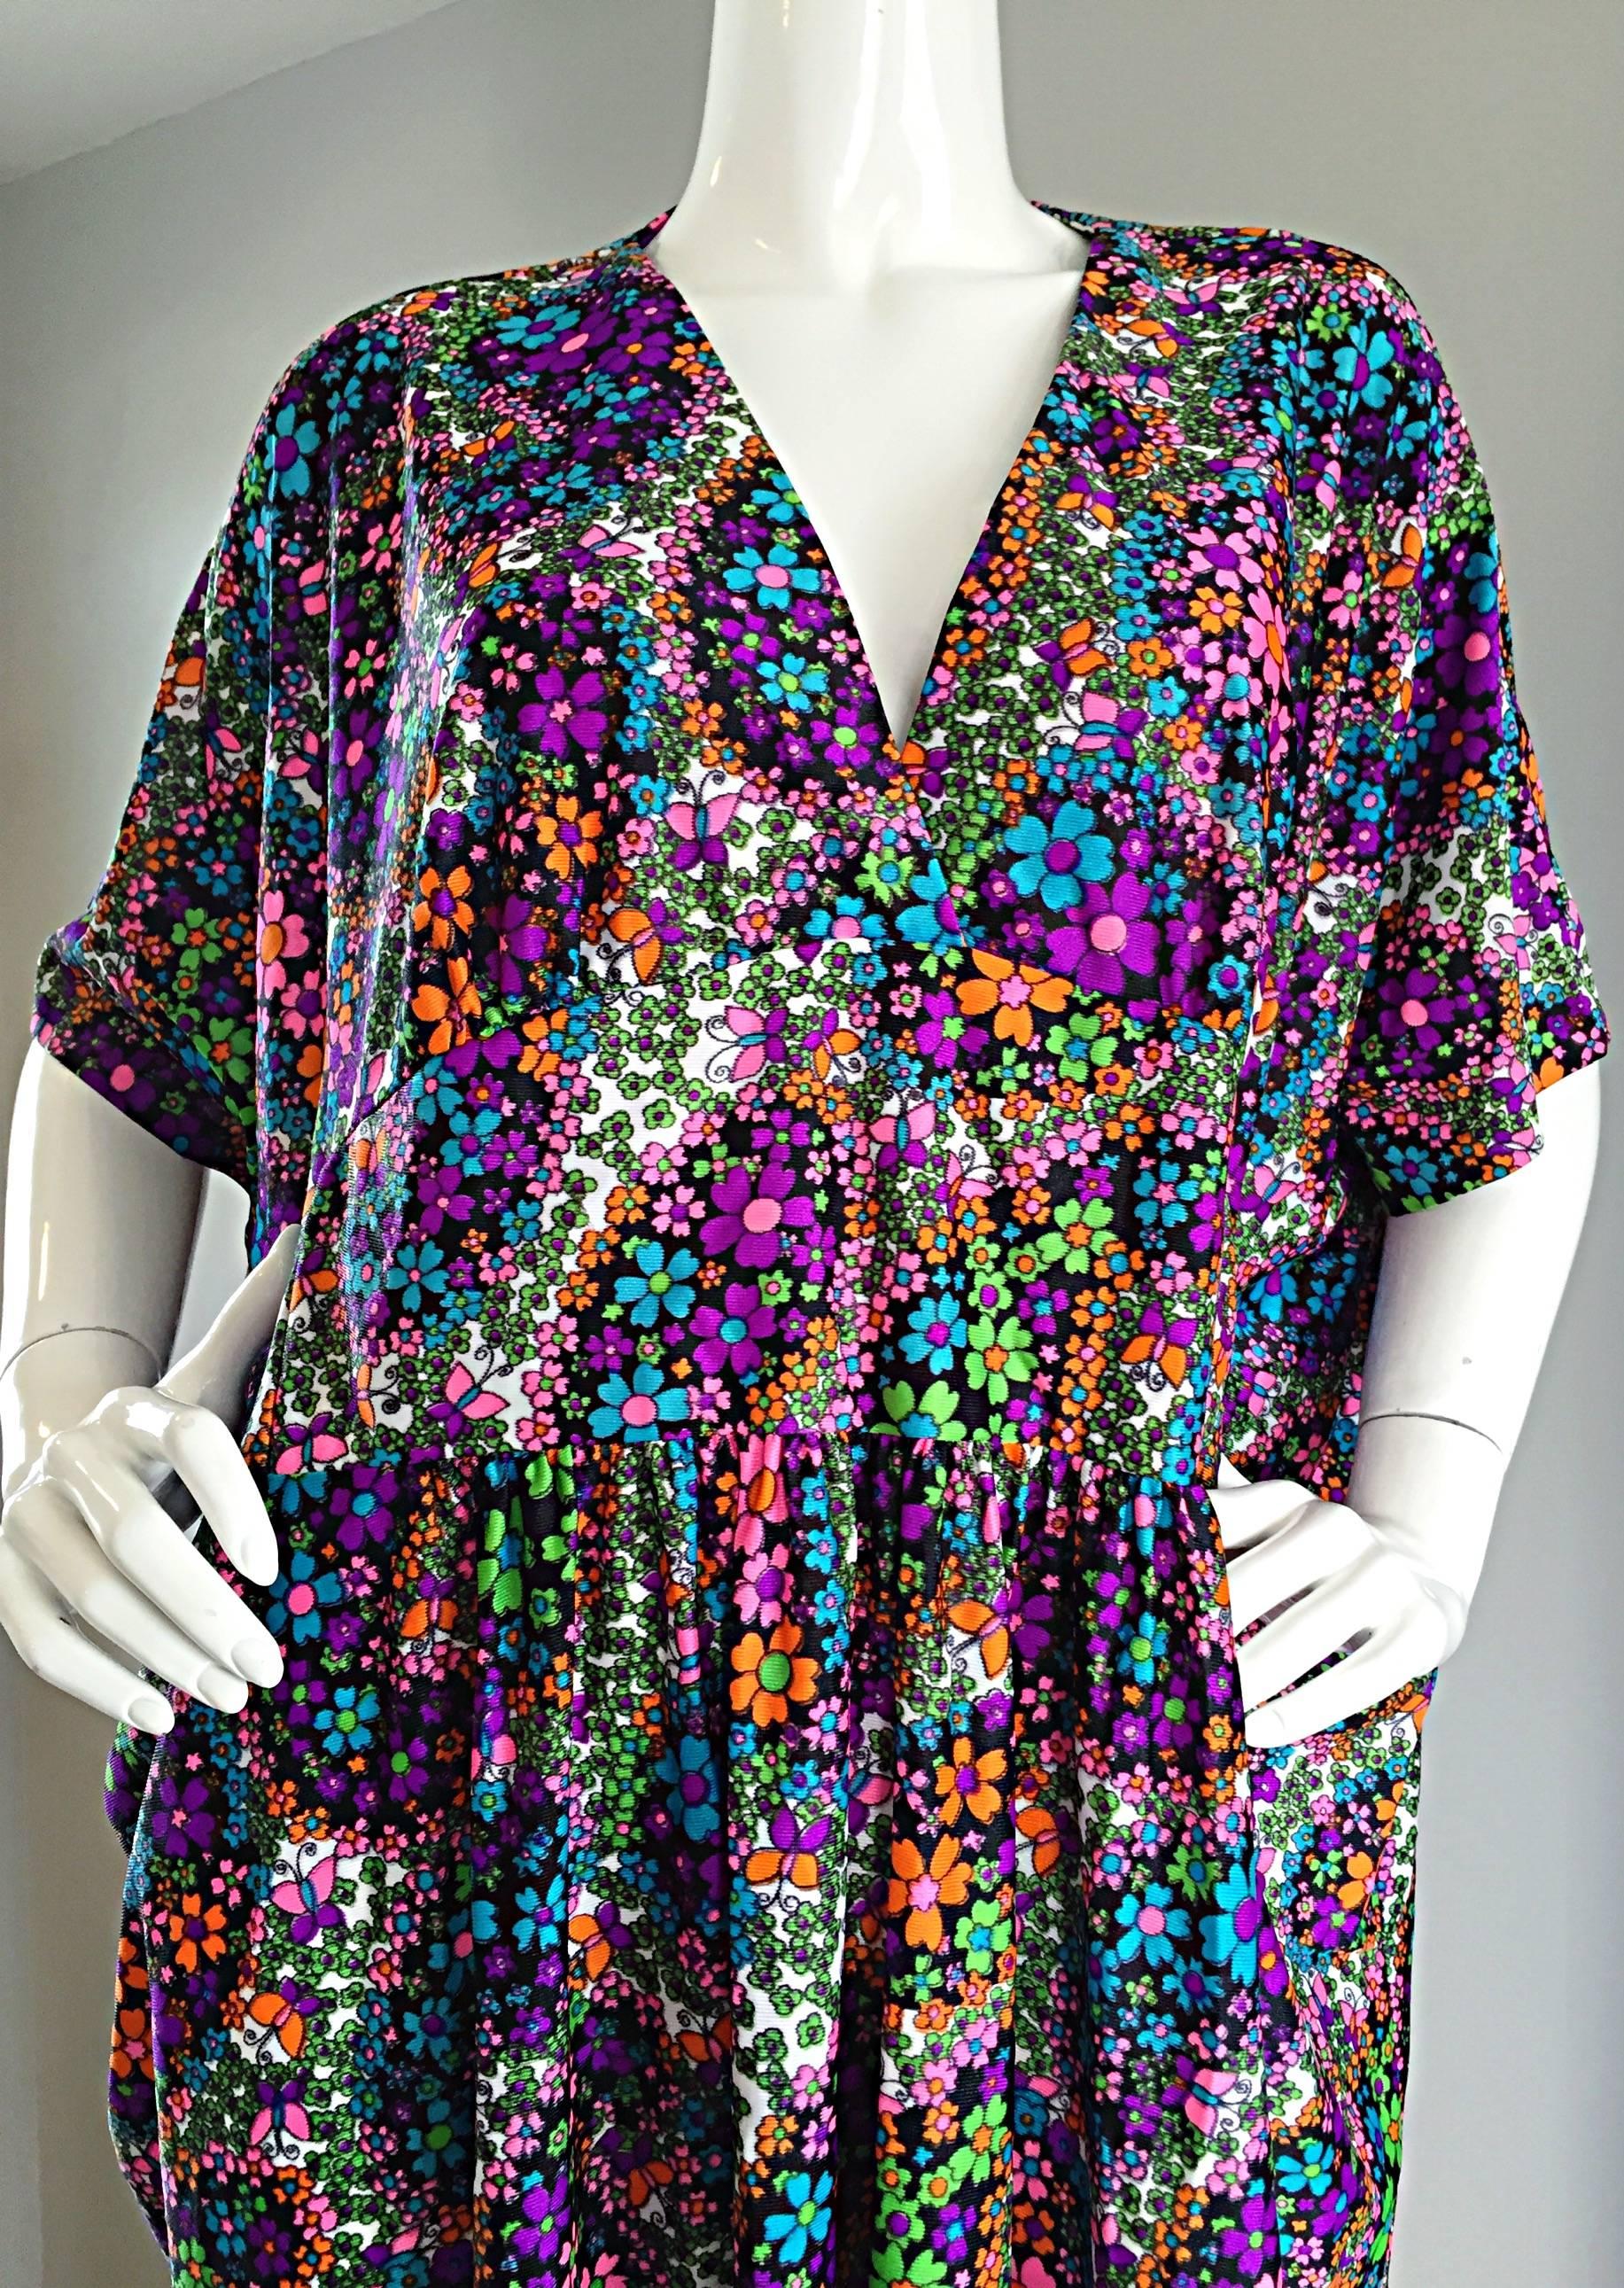 Black Amazing ' Butterflies and Flowers ' Colorful 1970s 70s Vintage Caftan Dress For Sale